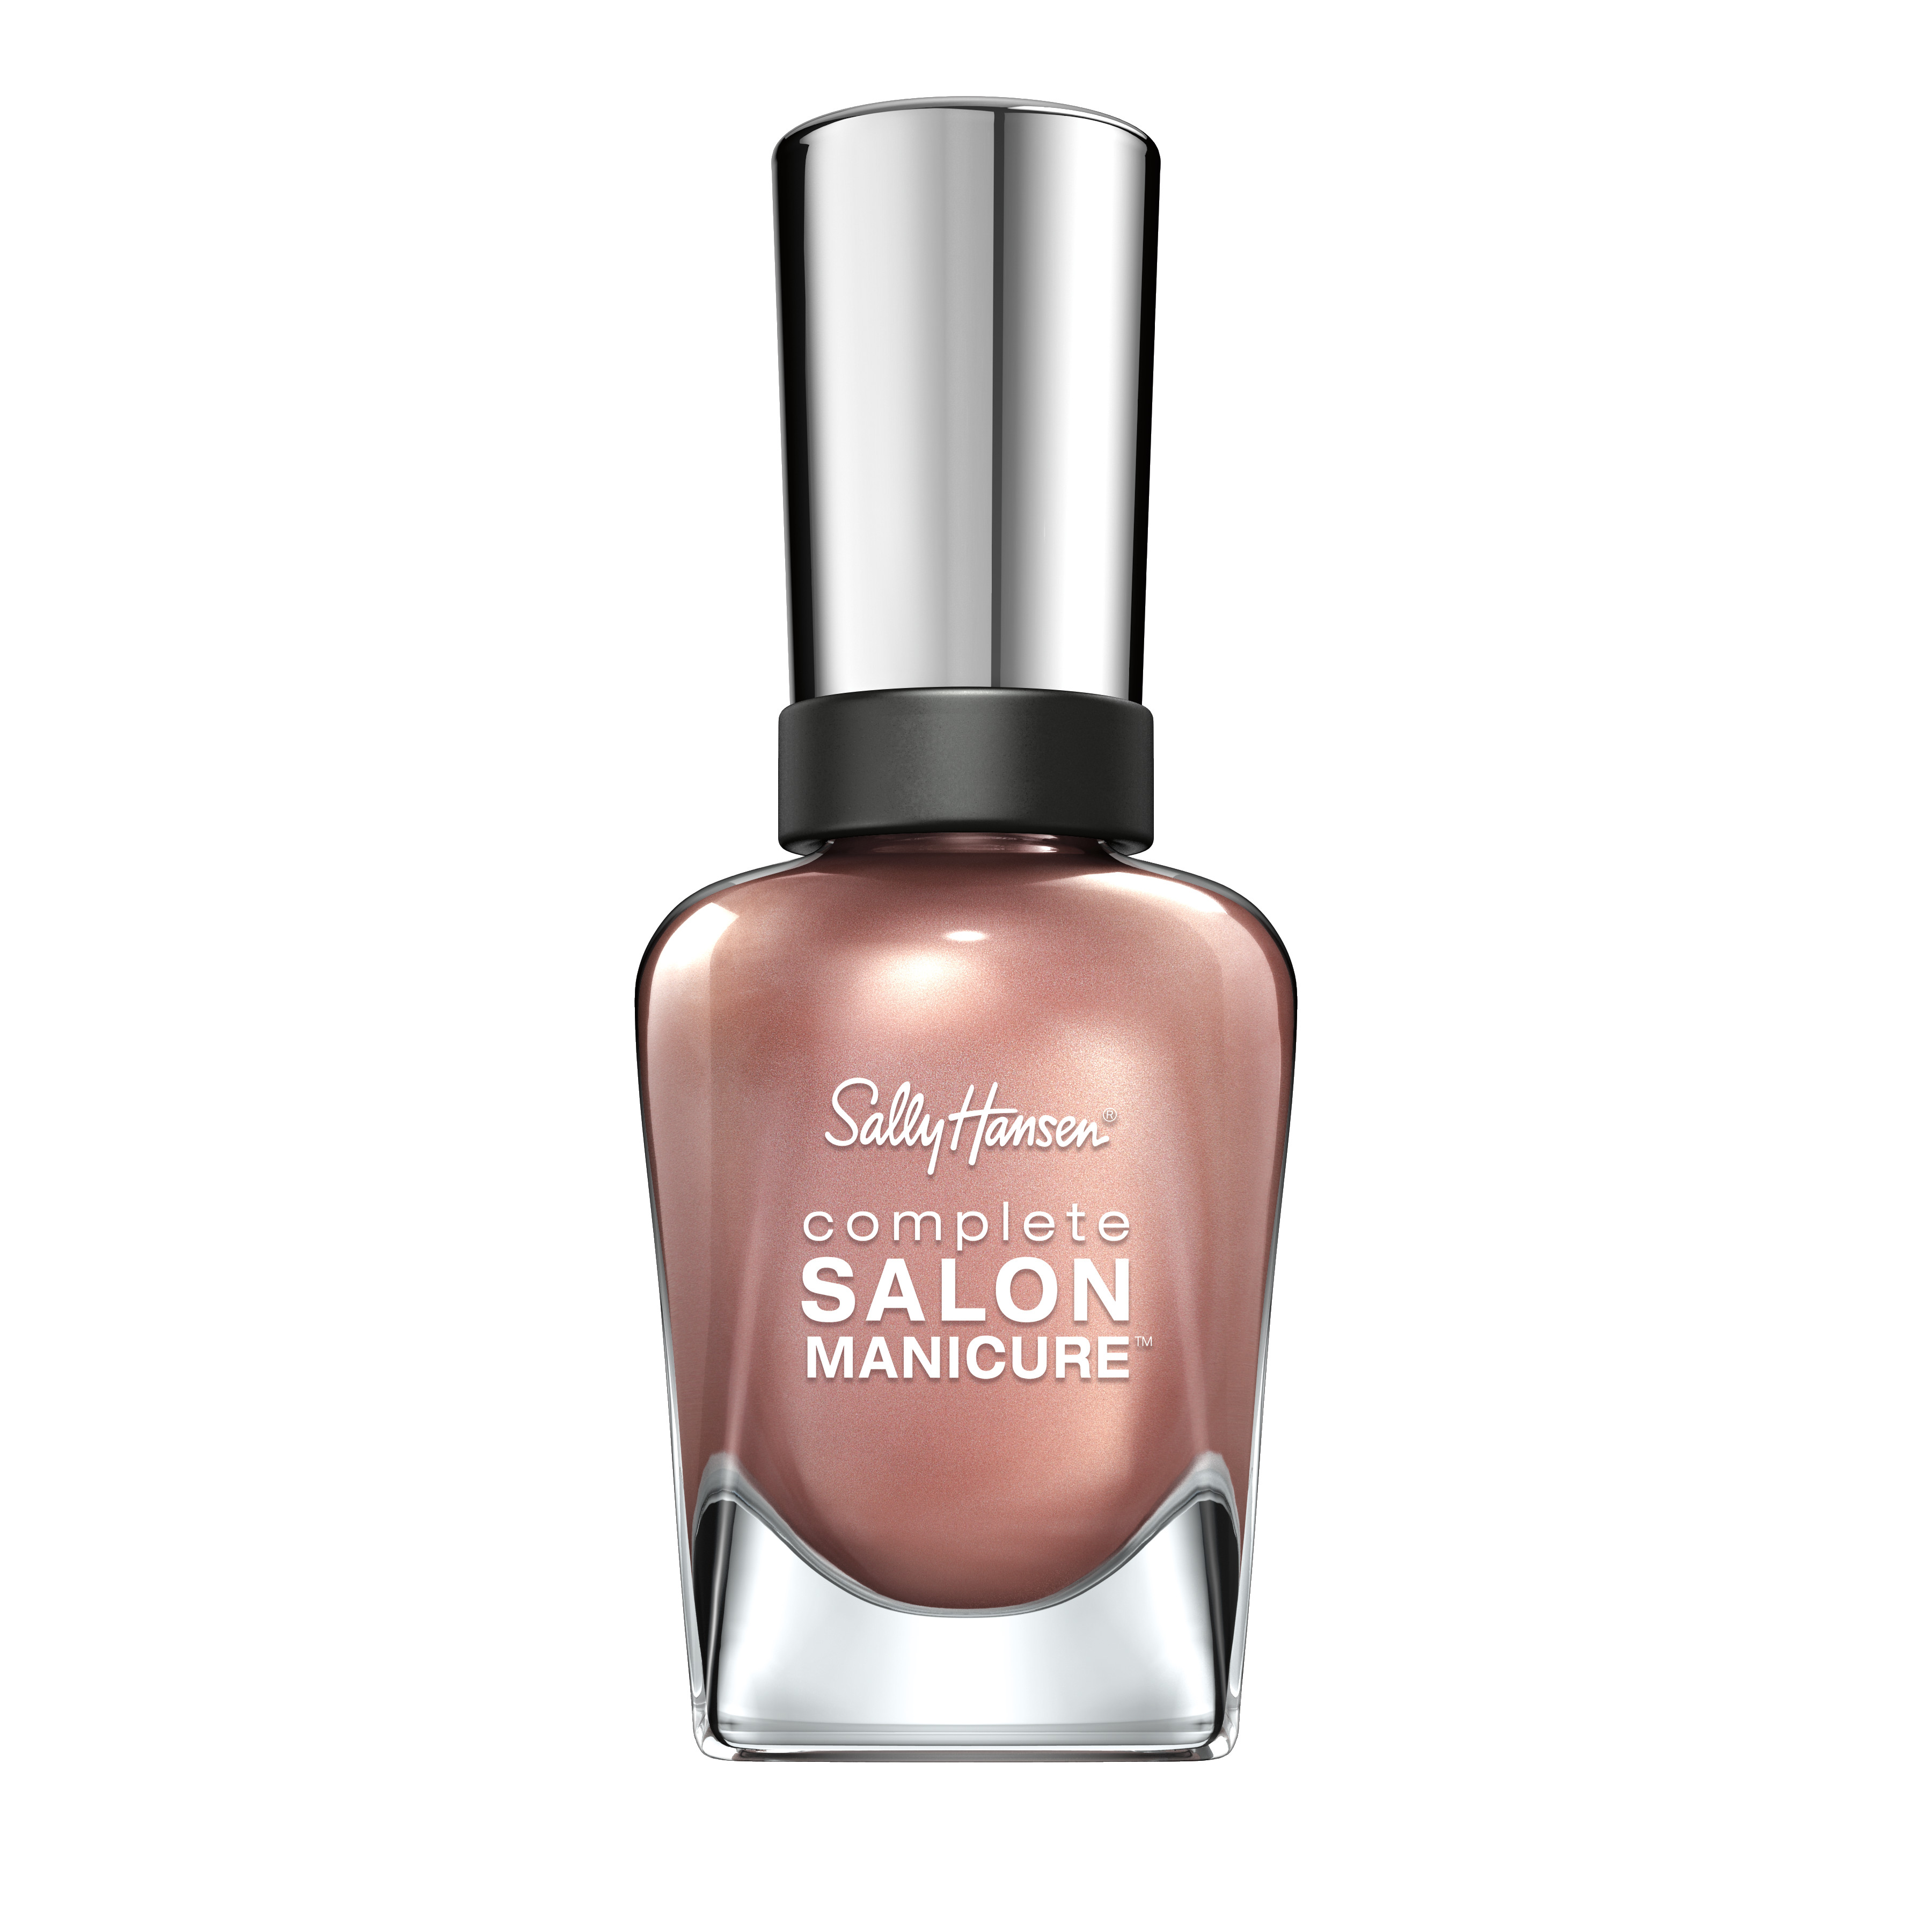 Sally Hansen Complete Salon Manicure Nail Color, World is My Oyster - image 1 of 2